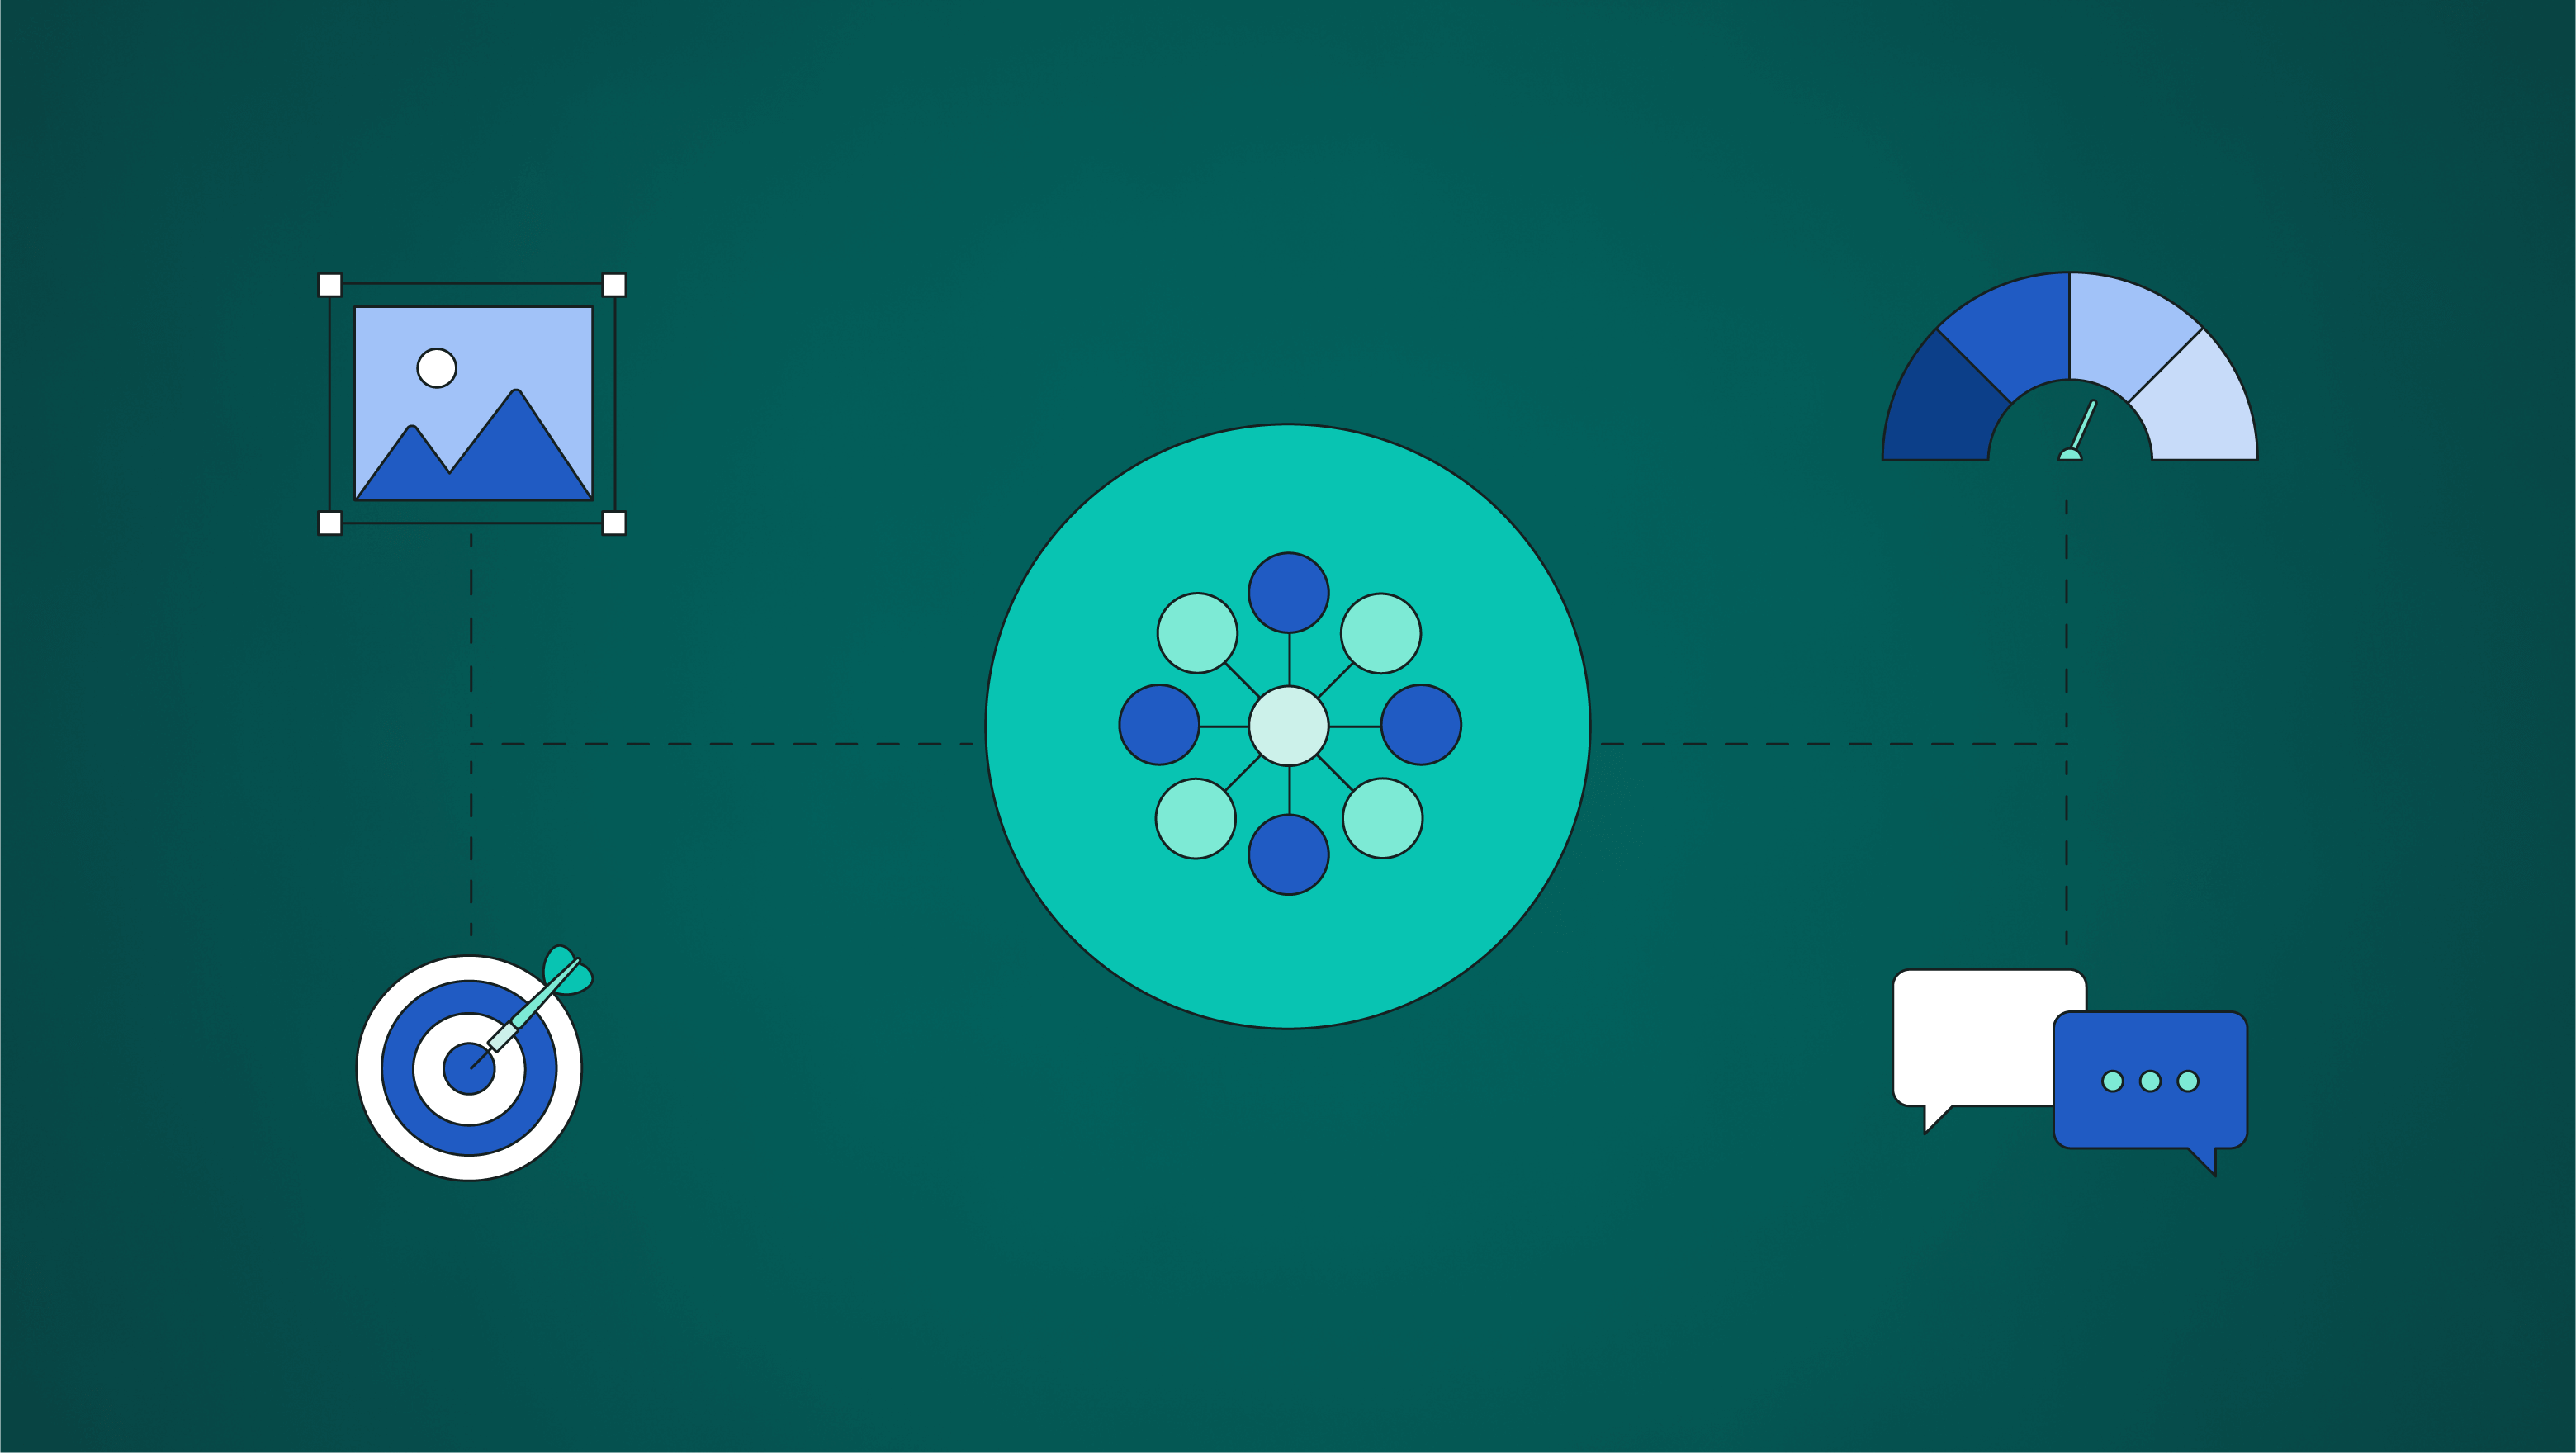 An illustration showing icons depicting social media images, target audiences, social comments and graphical charts surrounding a spherical hub. The image represents how AI tools assist in marketing across social workflows.